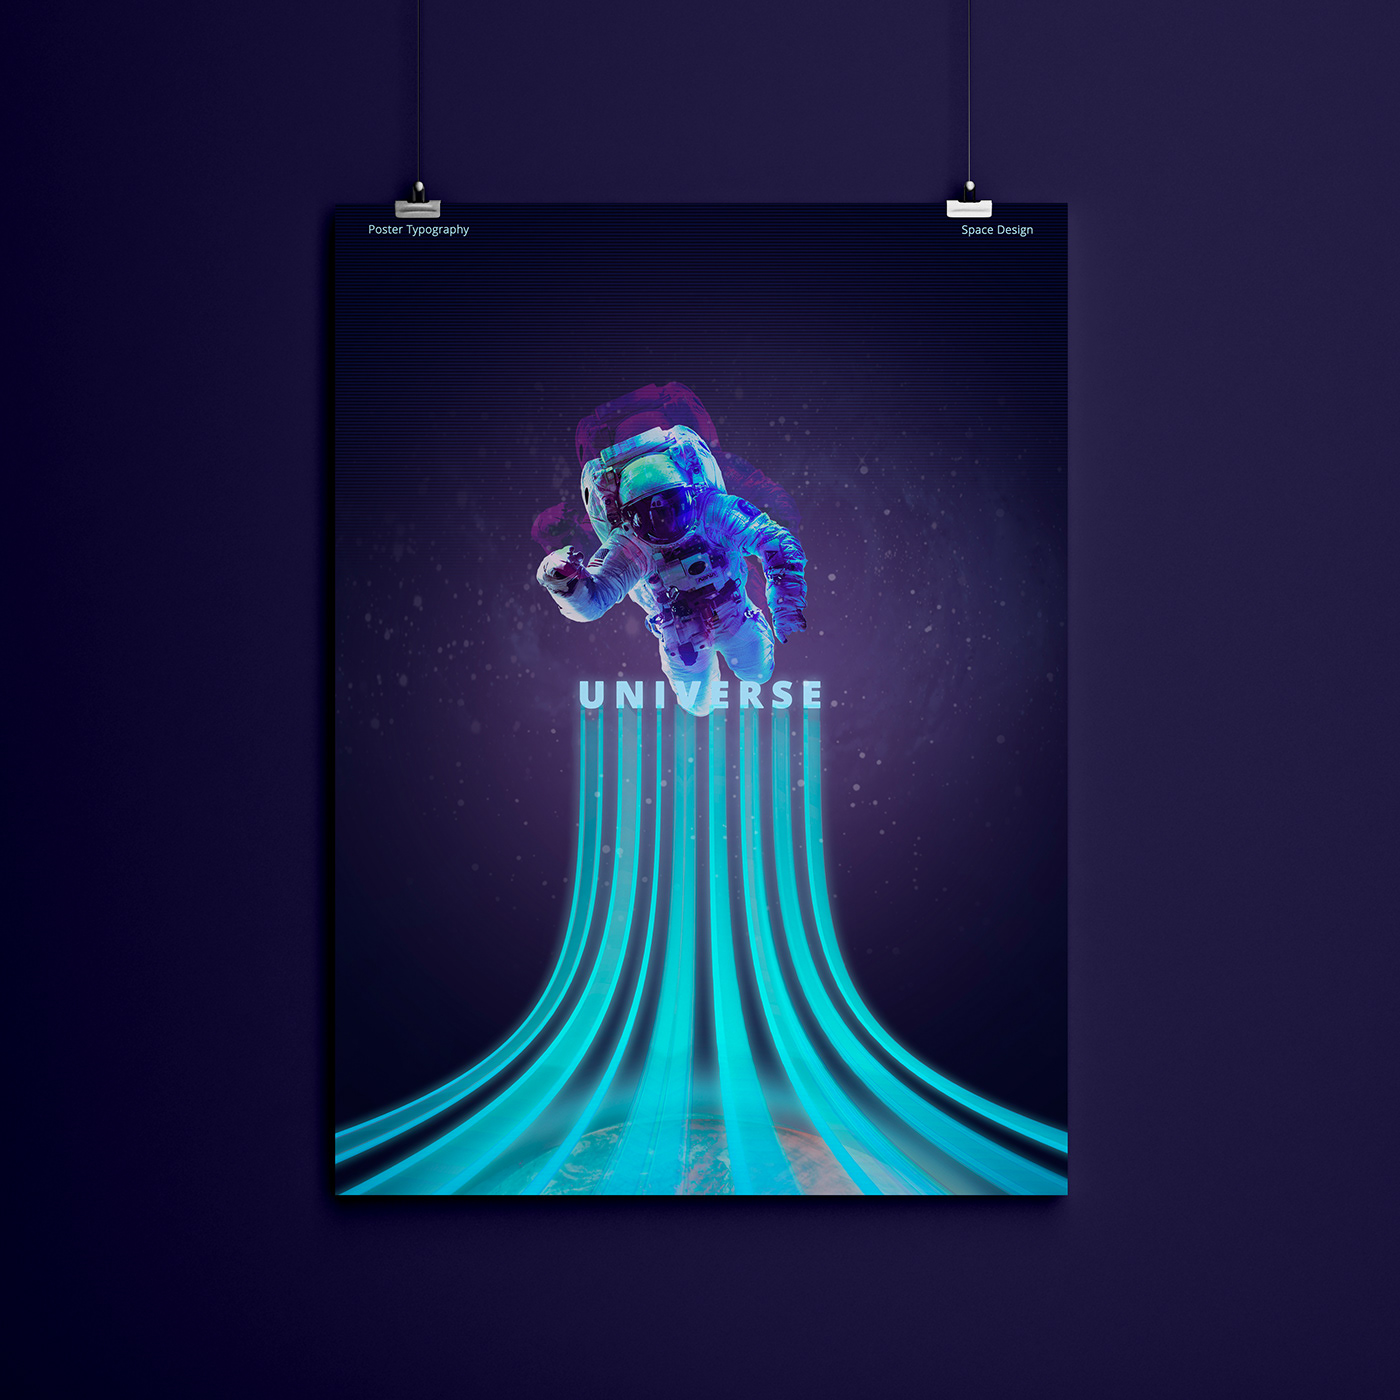 poster poster typography galaxy astronaut Glitch effect universe stars Space design